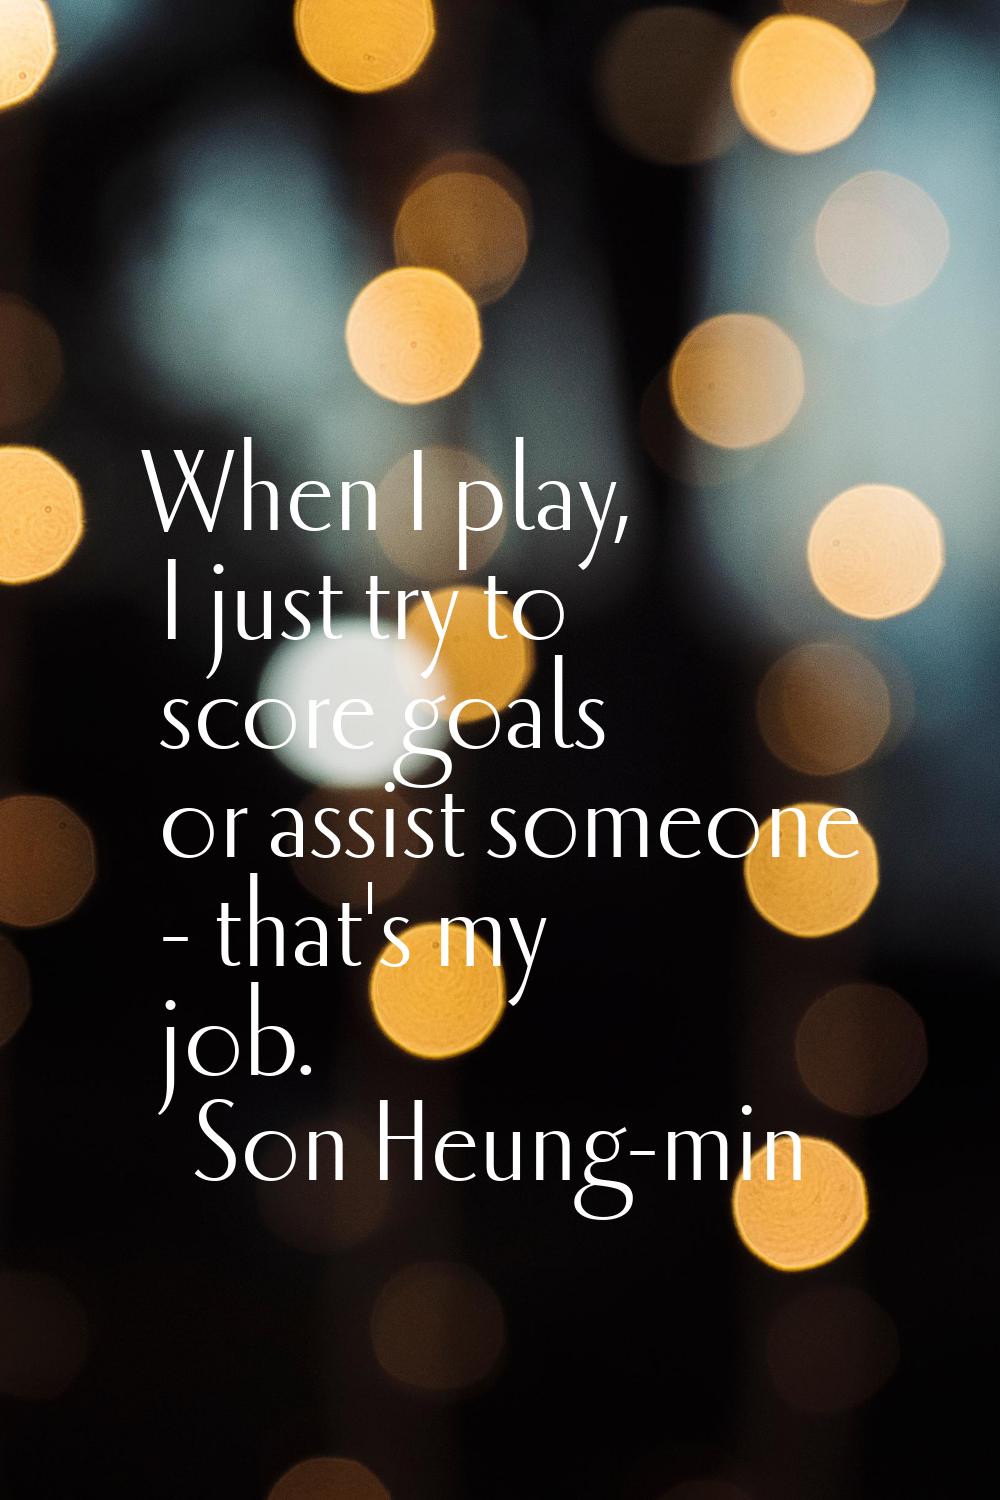 When I play, I just try to score goals or assist someone - that's my job.